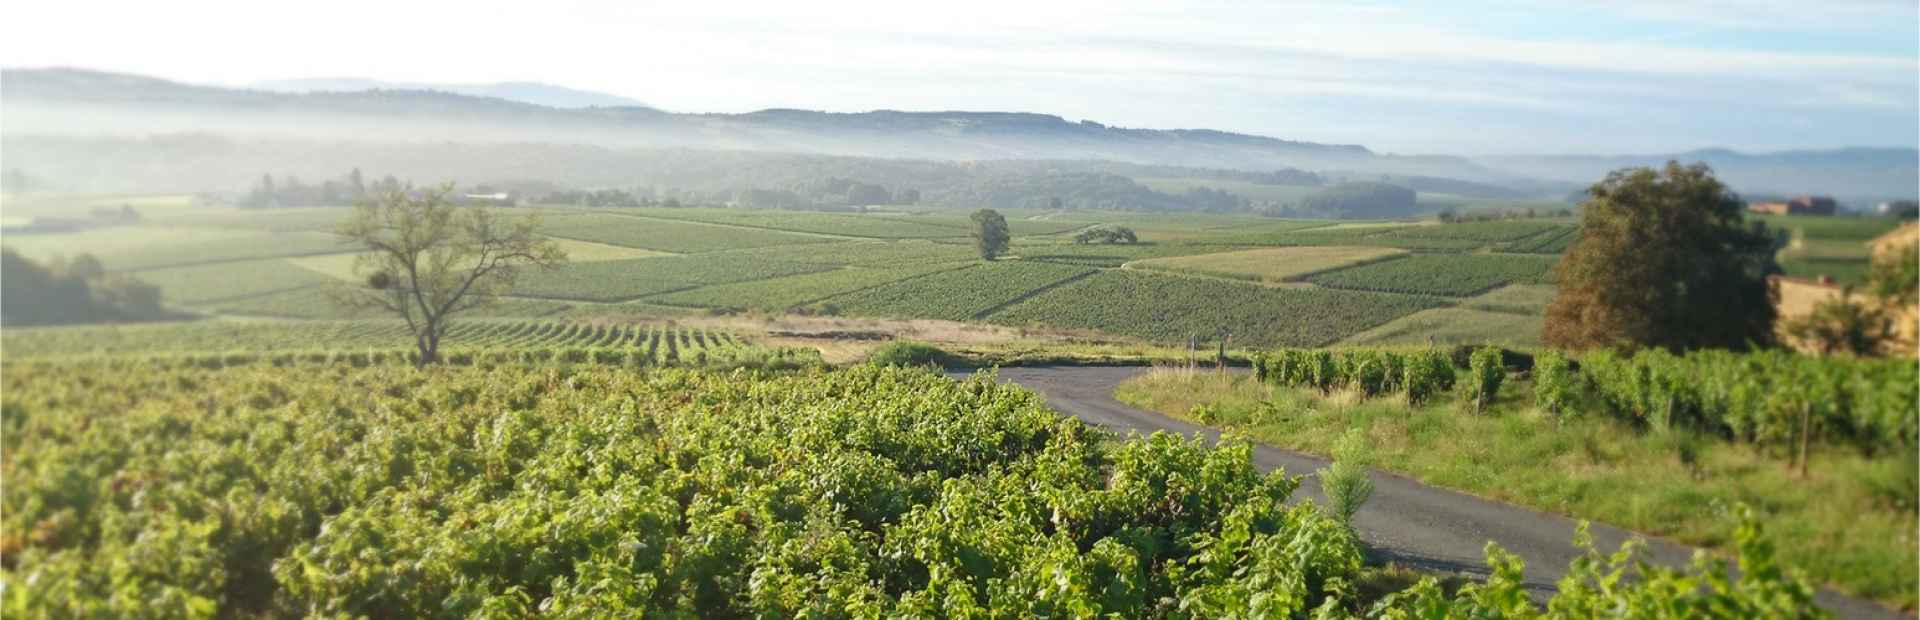 Winesof the appellation Côte-de-brouilly